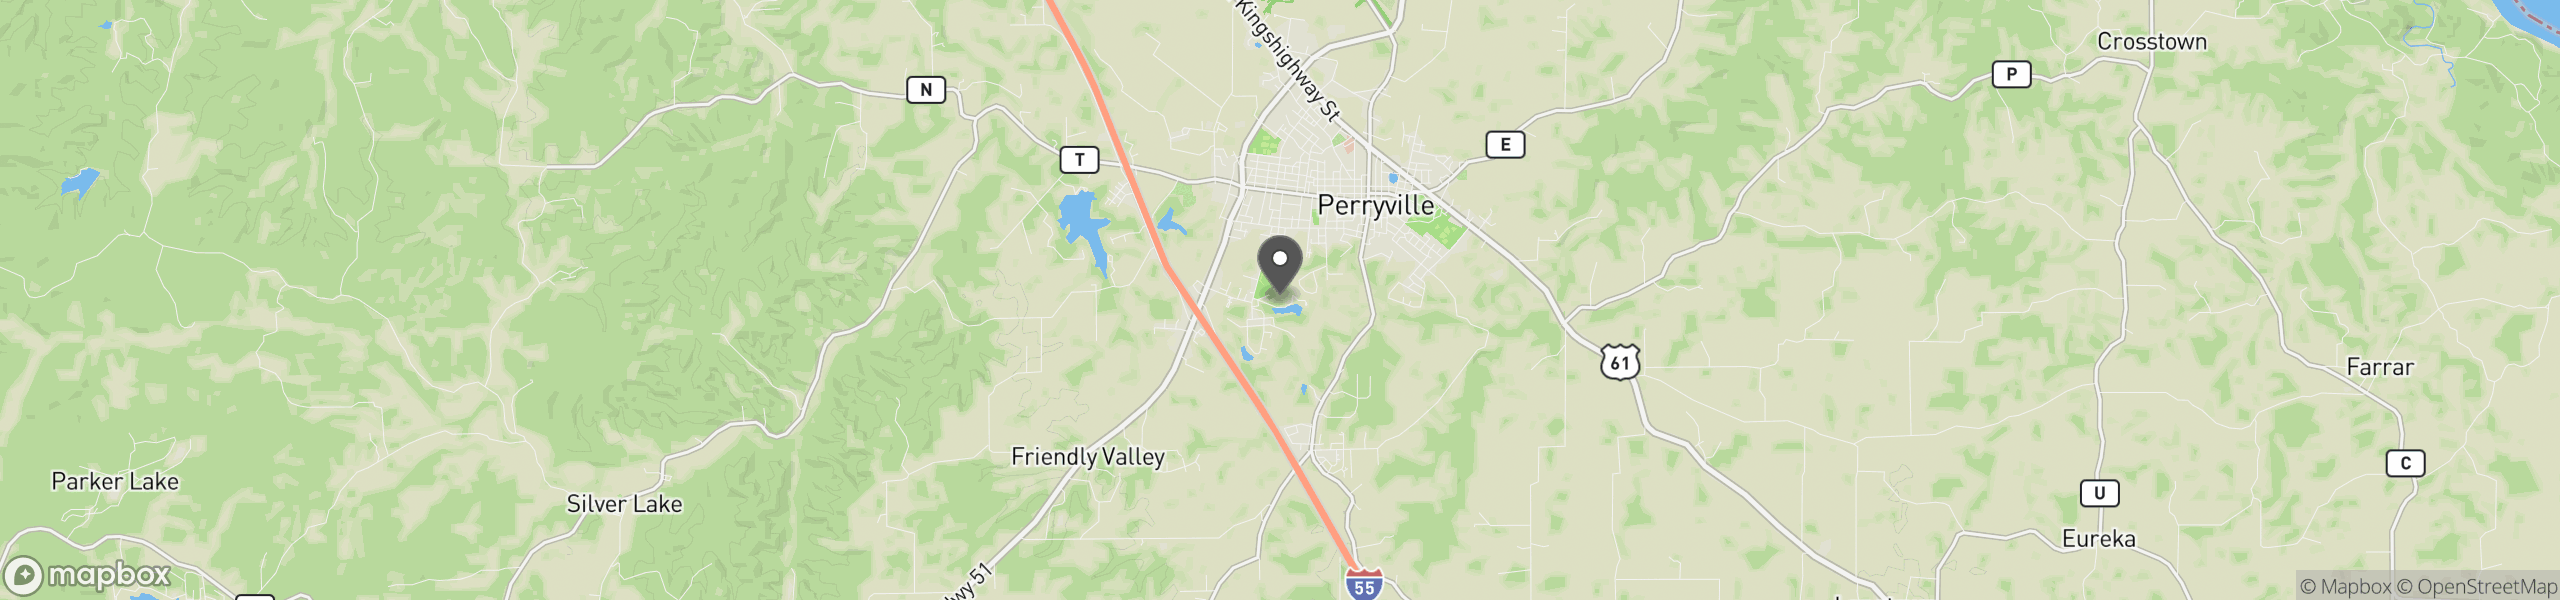 Perryville, MO